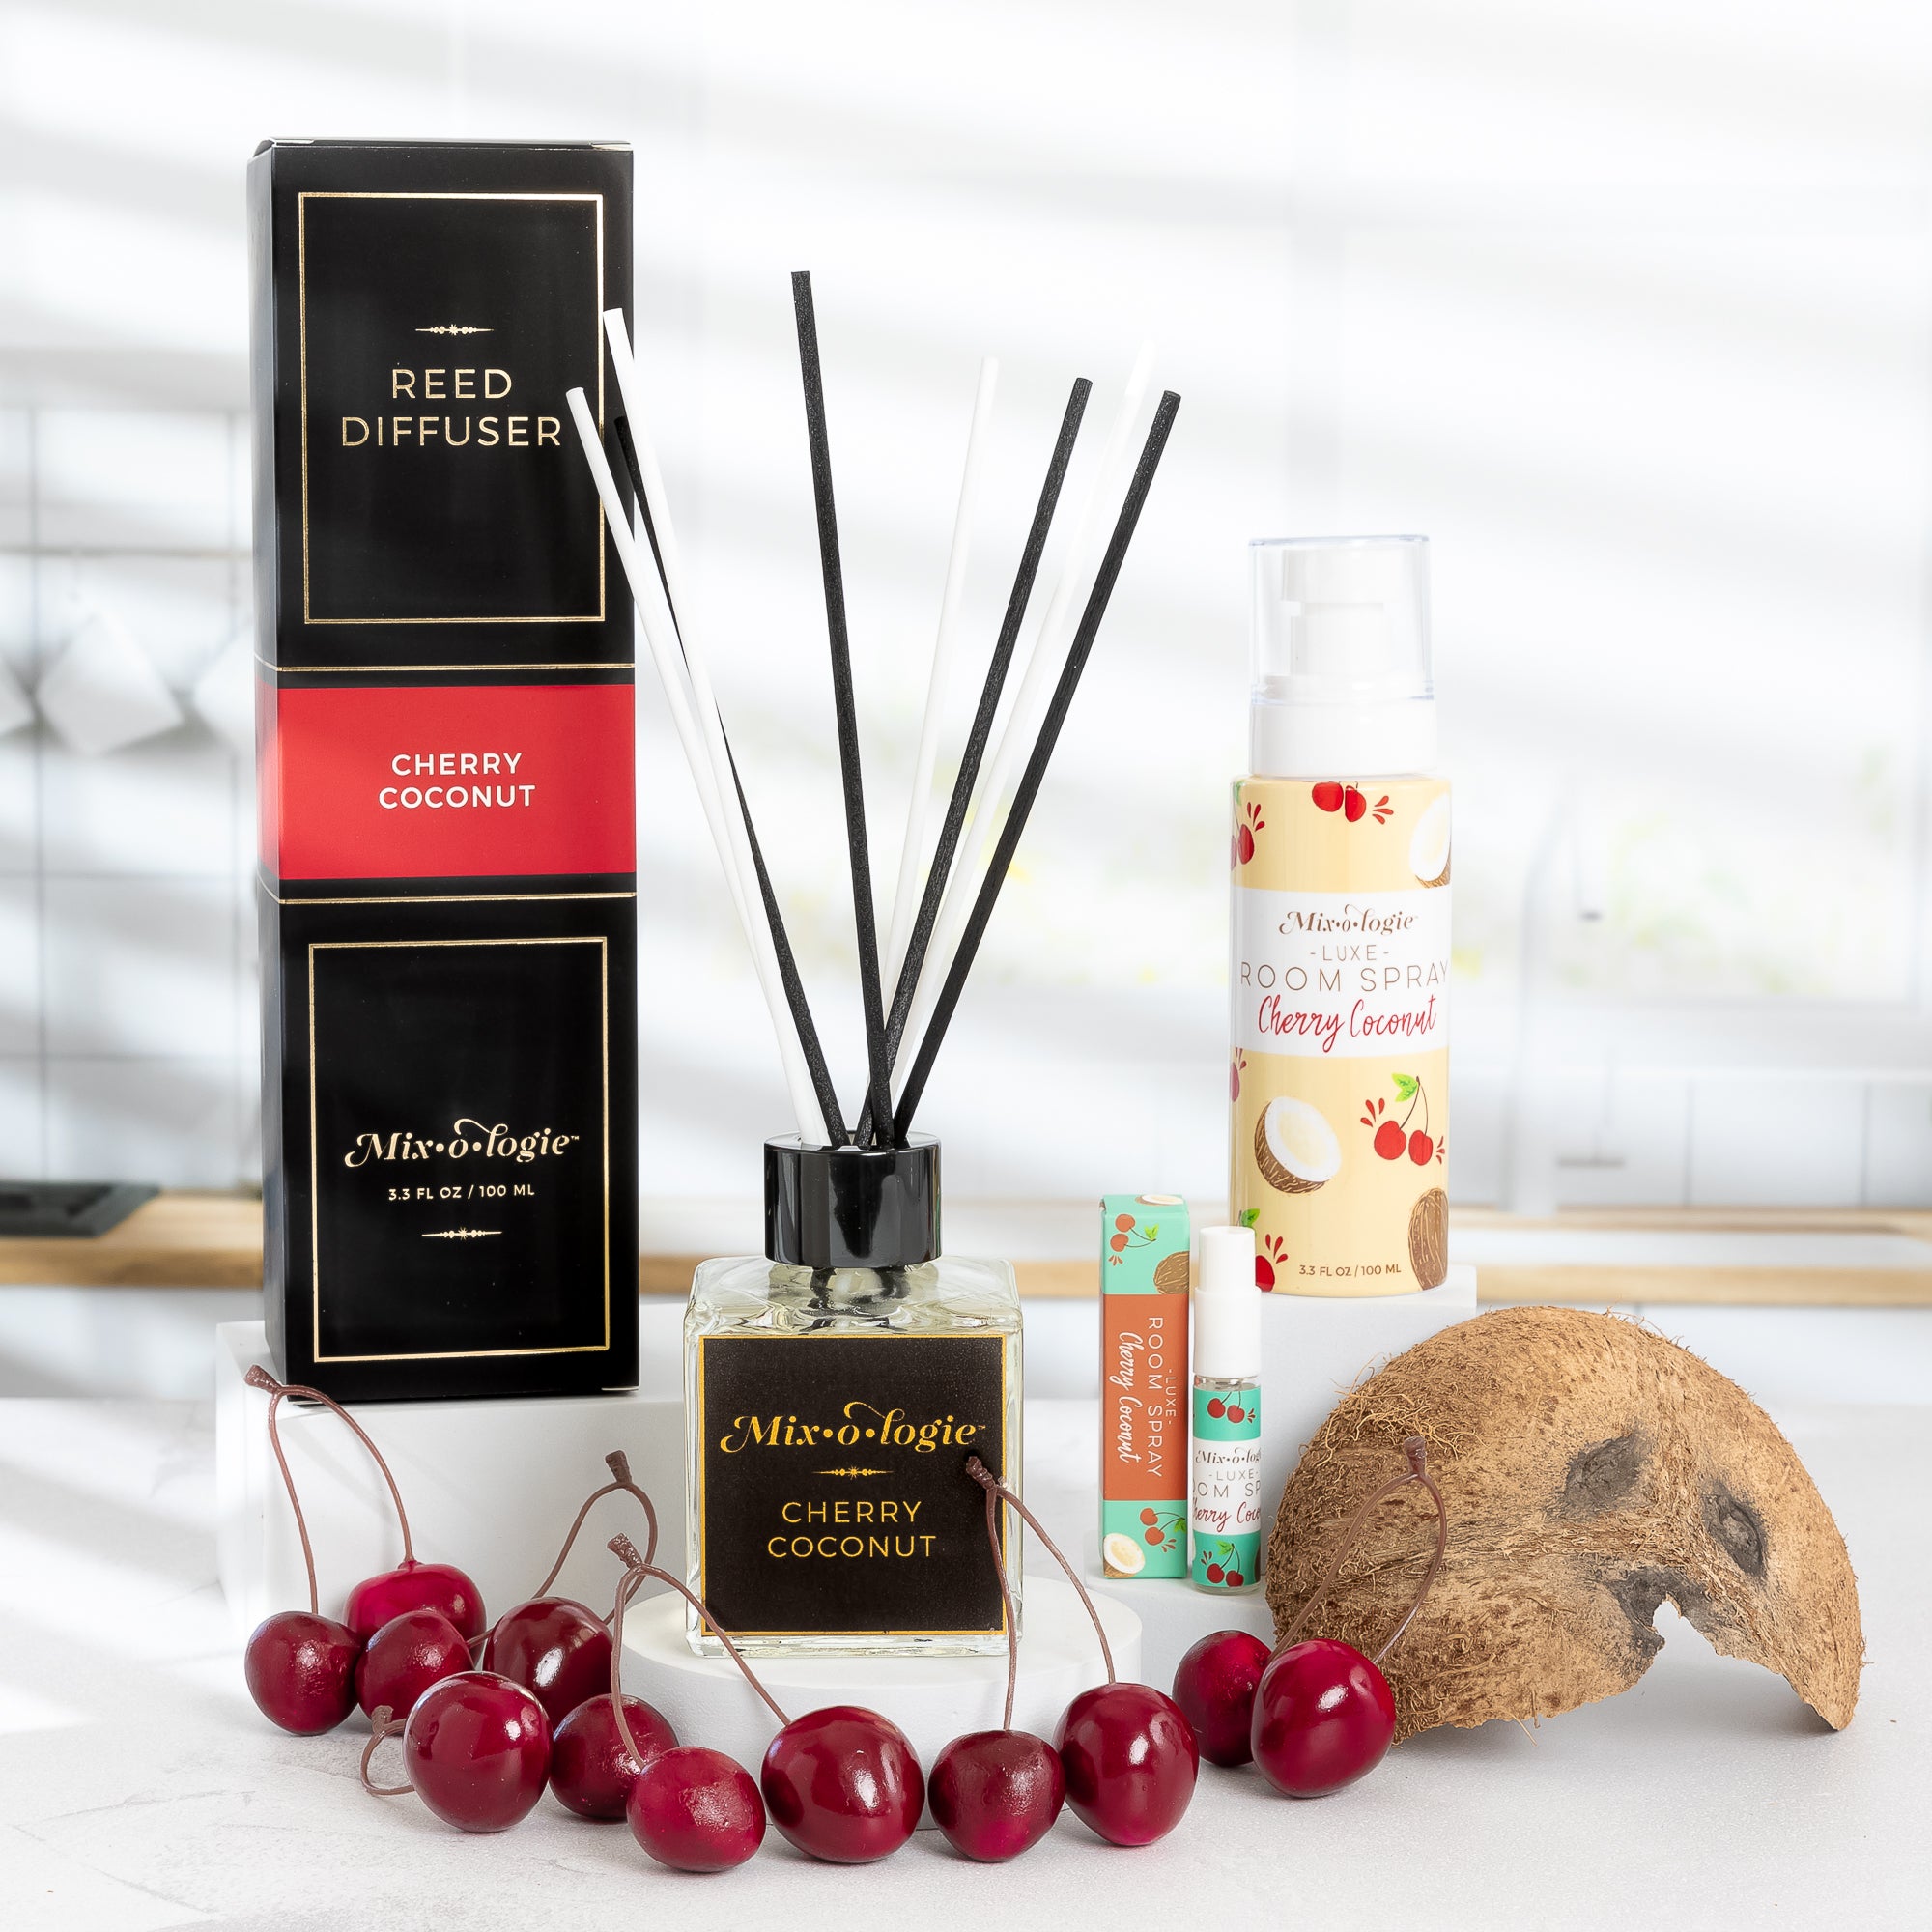 Cherry Coconut Reed Diffuser